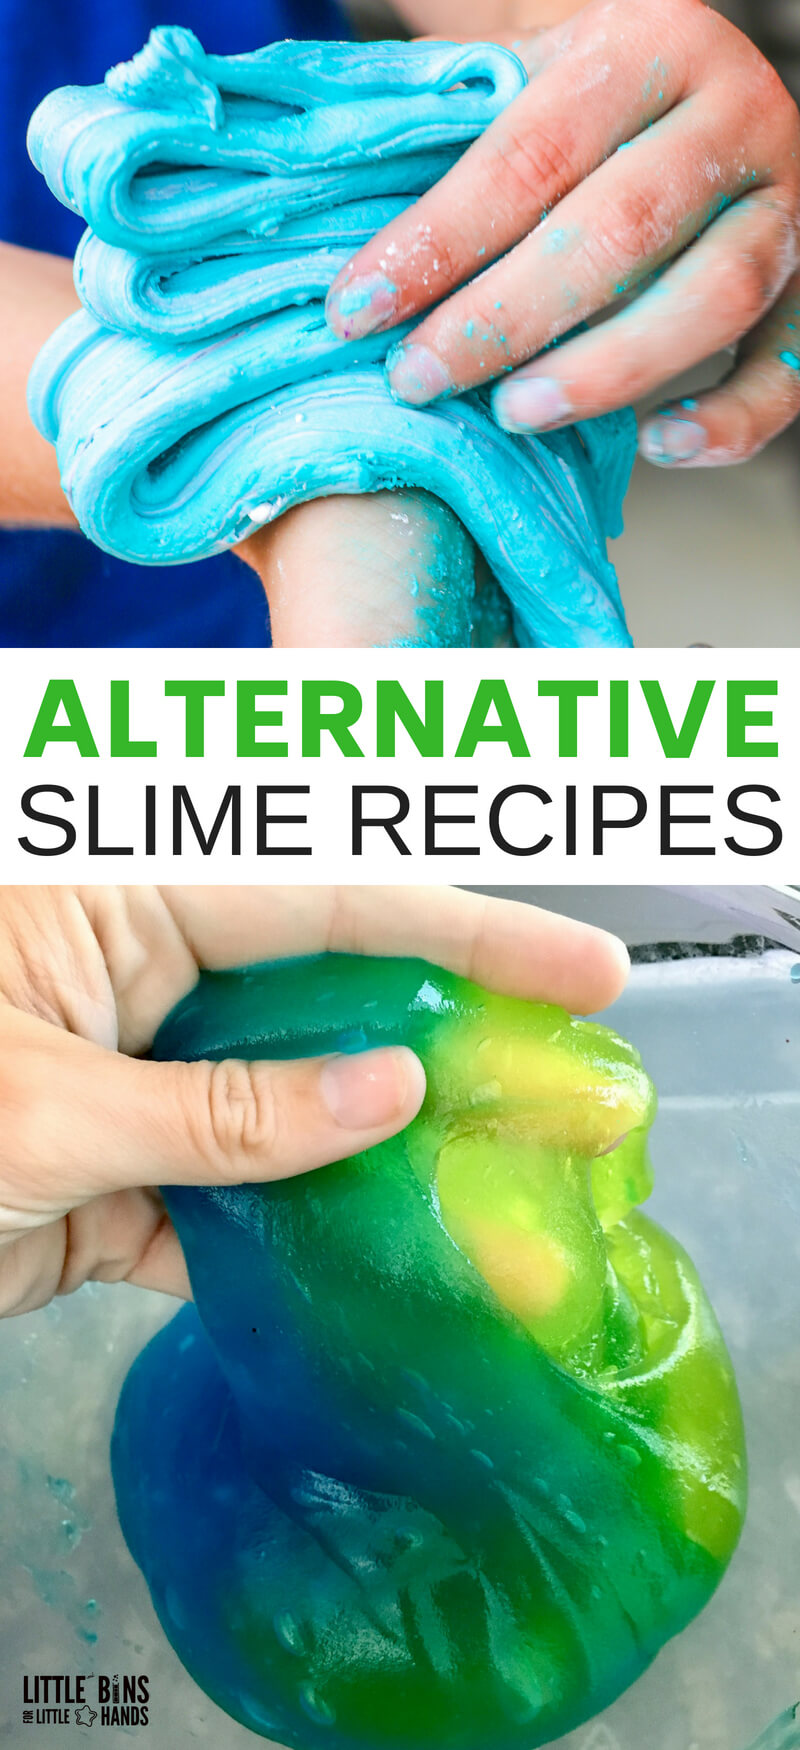 Our alternative slime recipes are perfect no matter where you live or what slime making ingredients you have available. There is a homemade slime recipe for everyone here. Try edible slime recipes, borax free slime recipes, and even no glue slime recipes for an amazing slime making adventure!